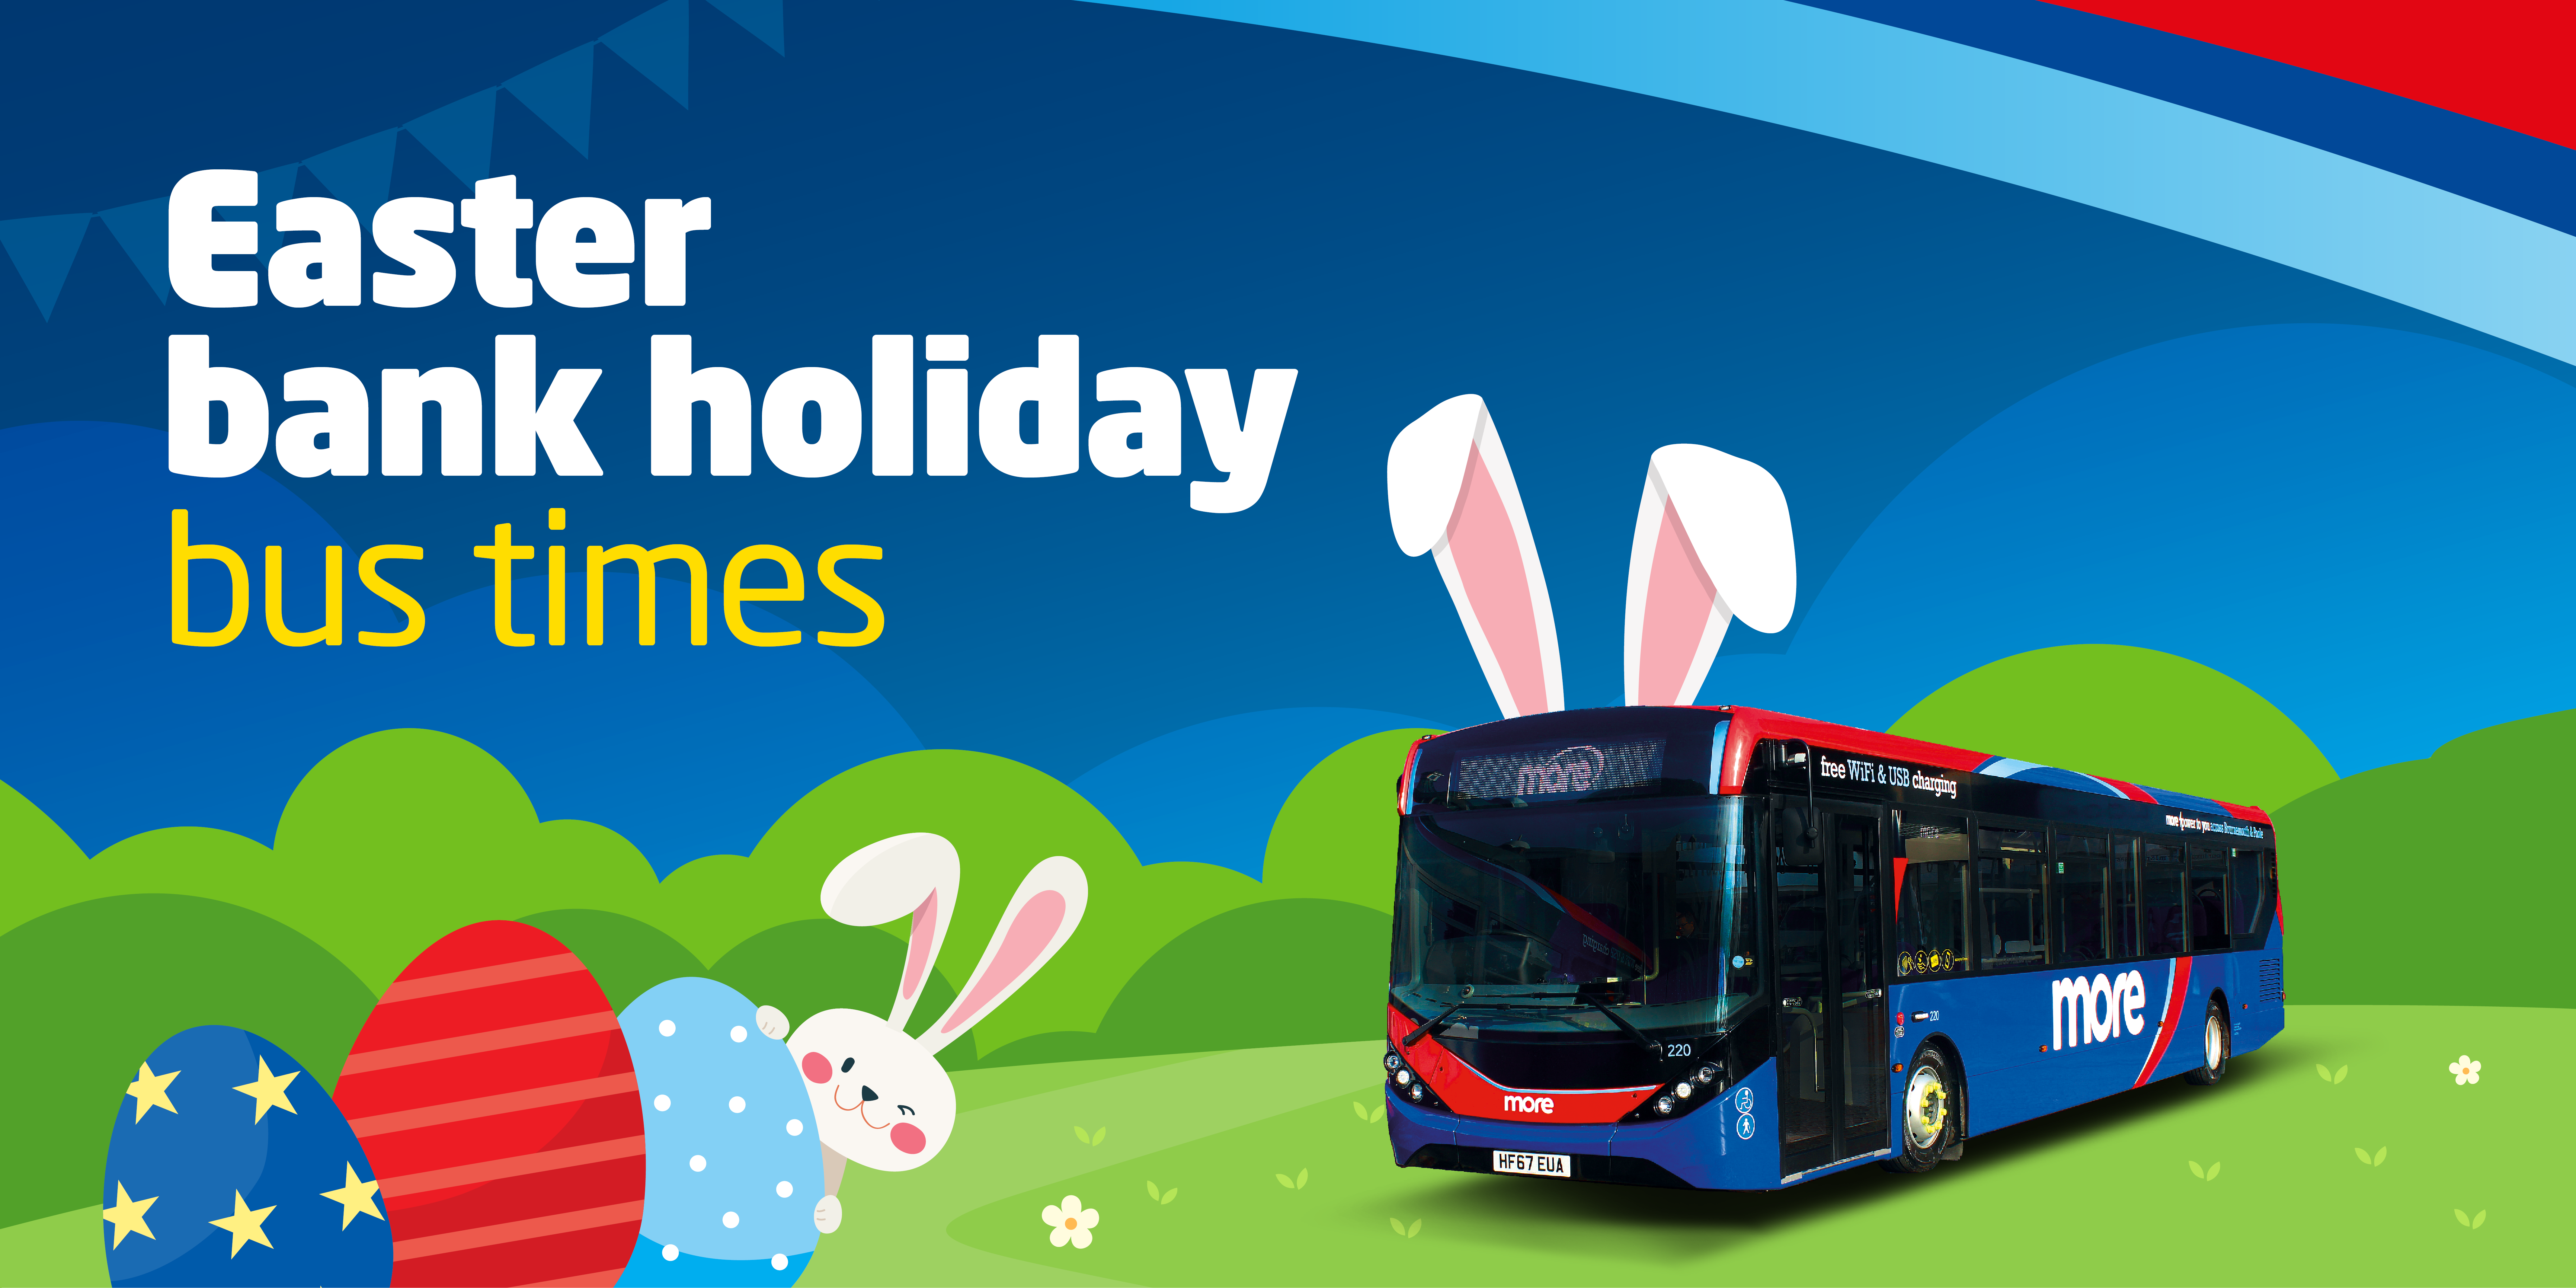 Easter bank holidays bus times image with a bus with ears